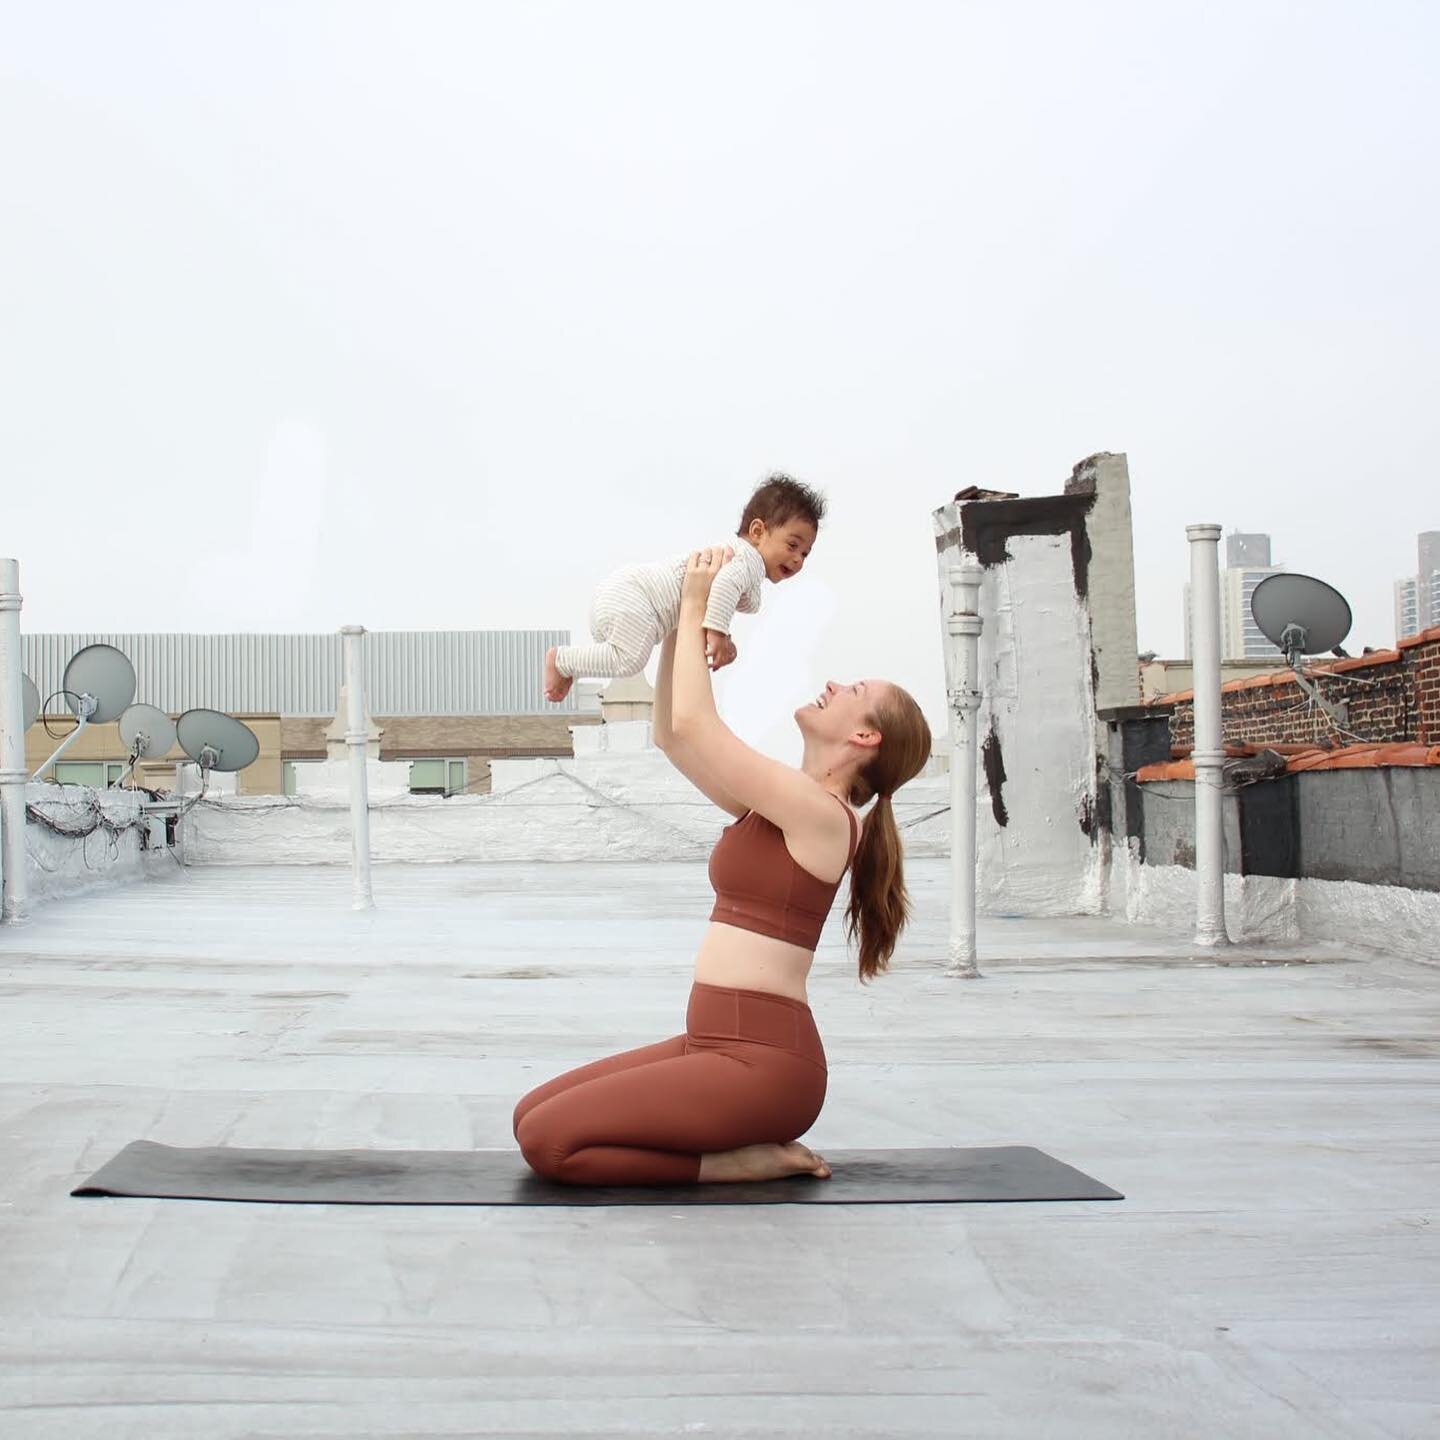 Meet Sarah Almodovar!

Sarah teaches pre/postnatal yoga and is passionate about empowering moms on the journey through pregnancy and postpartum. Her mission is to help you feel good pregnant, have a positive birth experience, and love your body postp